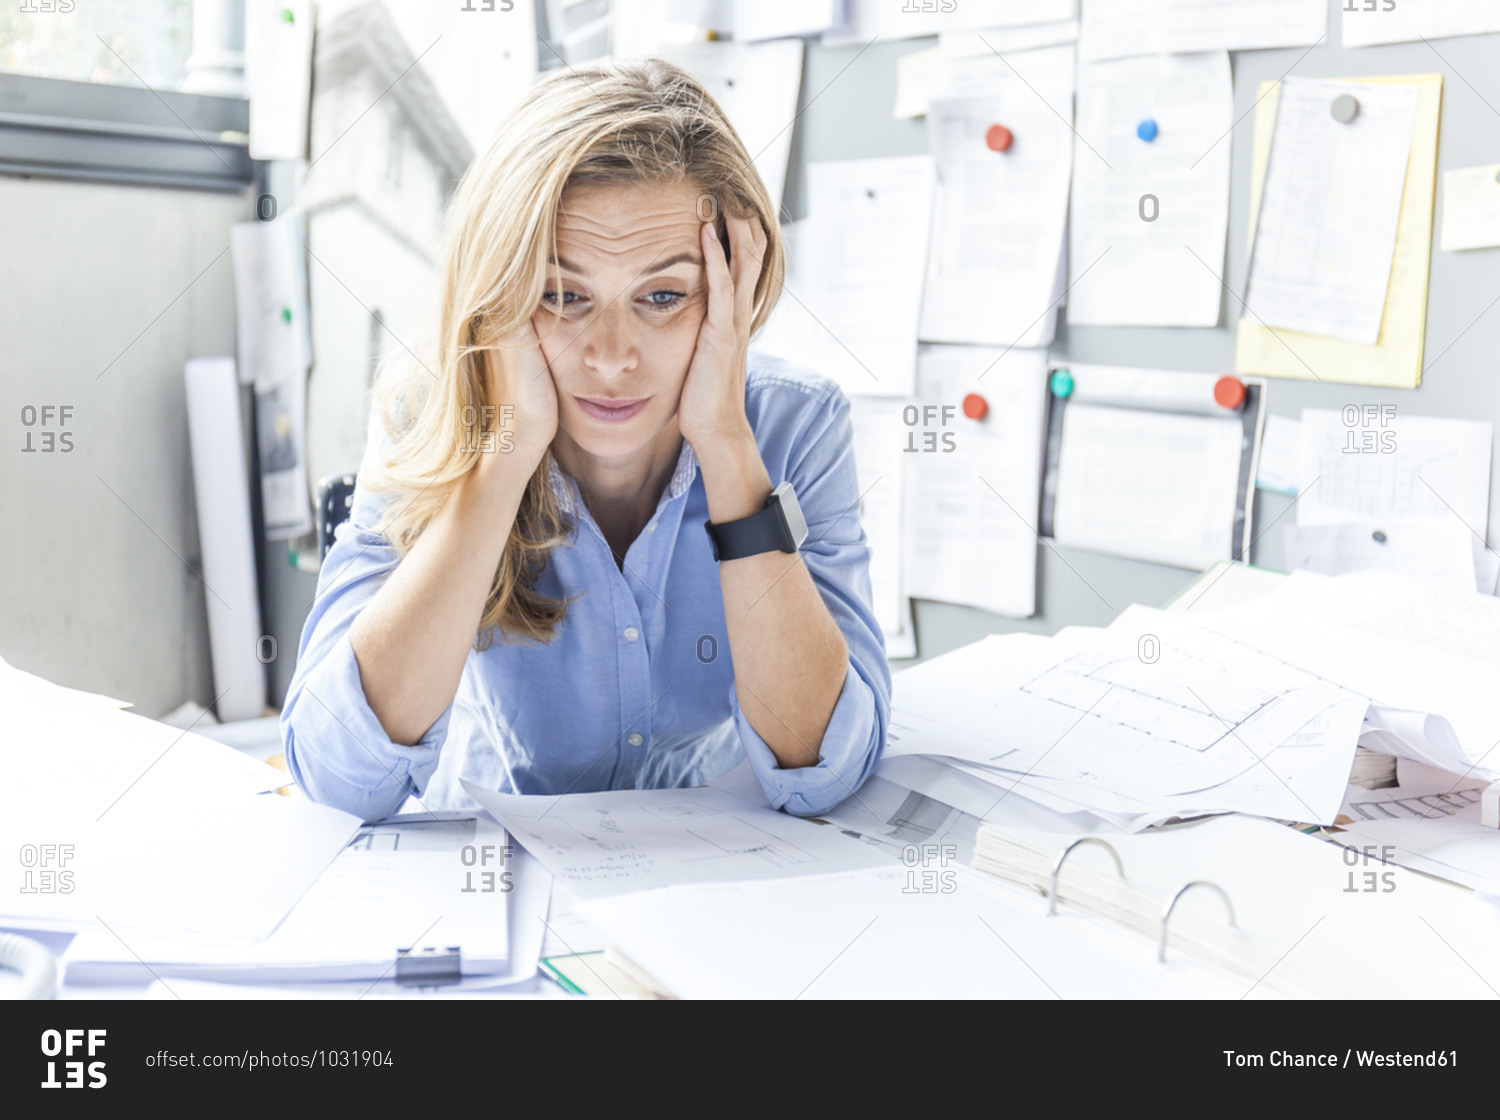 Stressed woman sitting at desk in office surrounded by paperwork